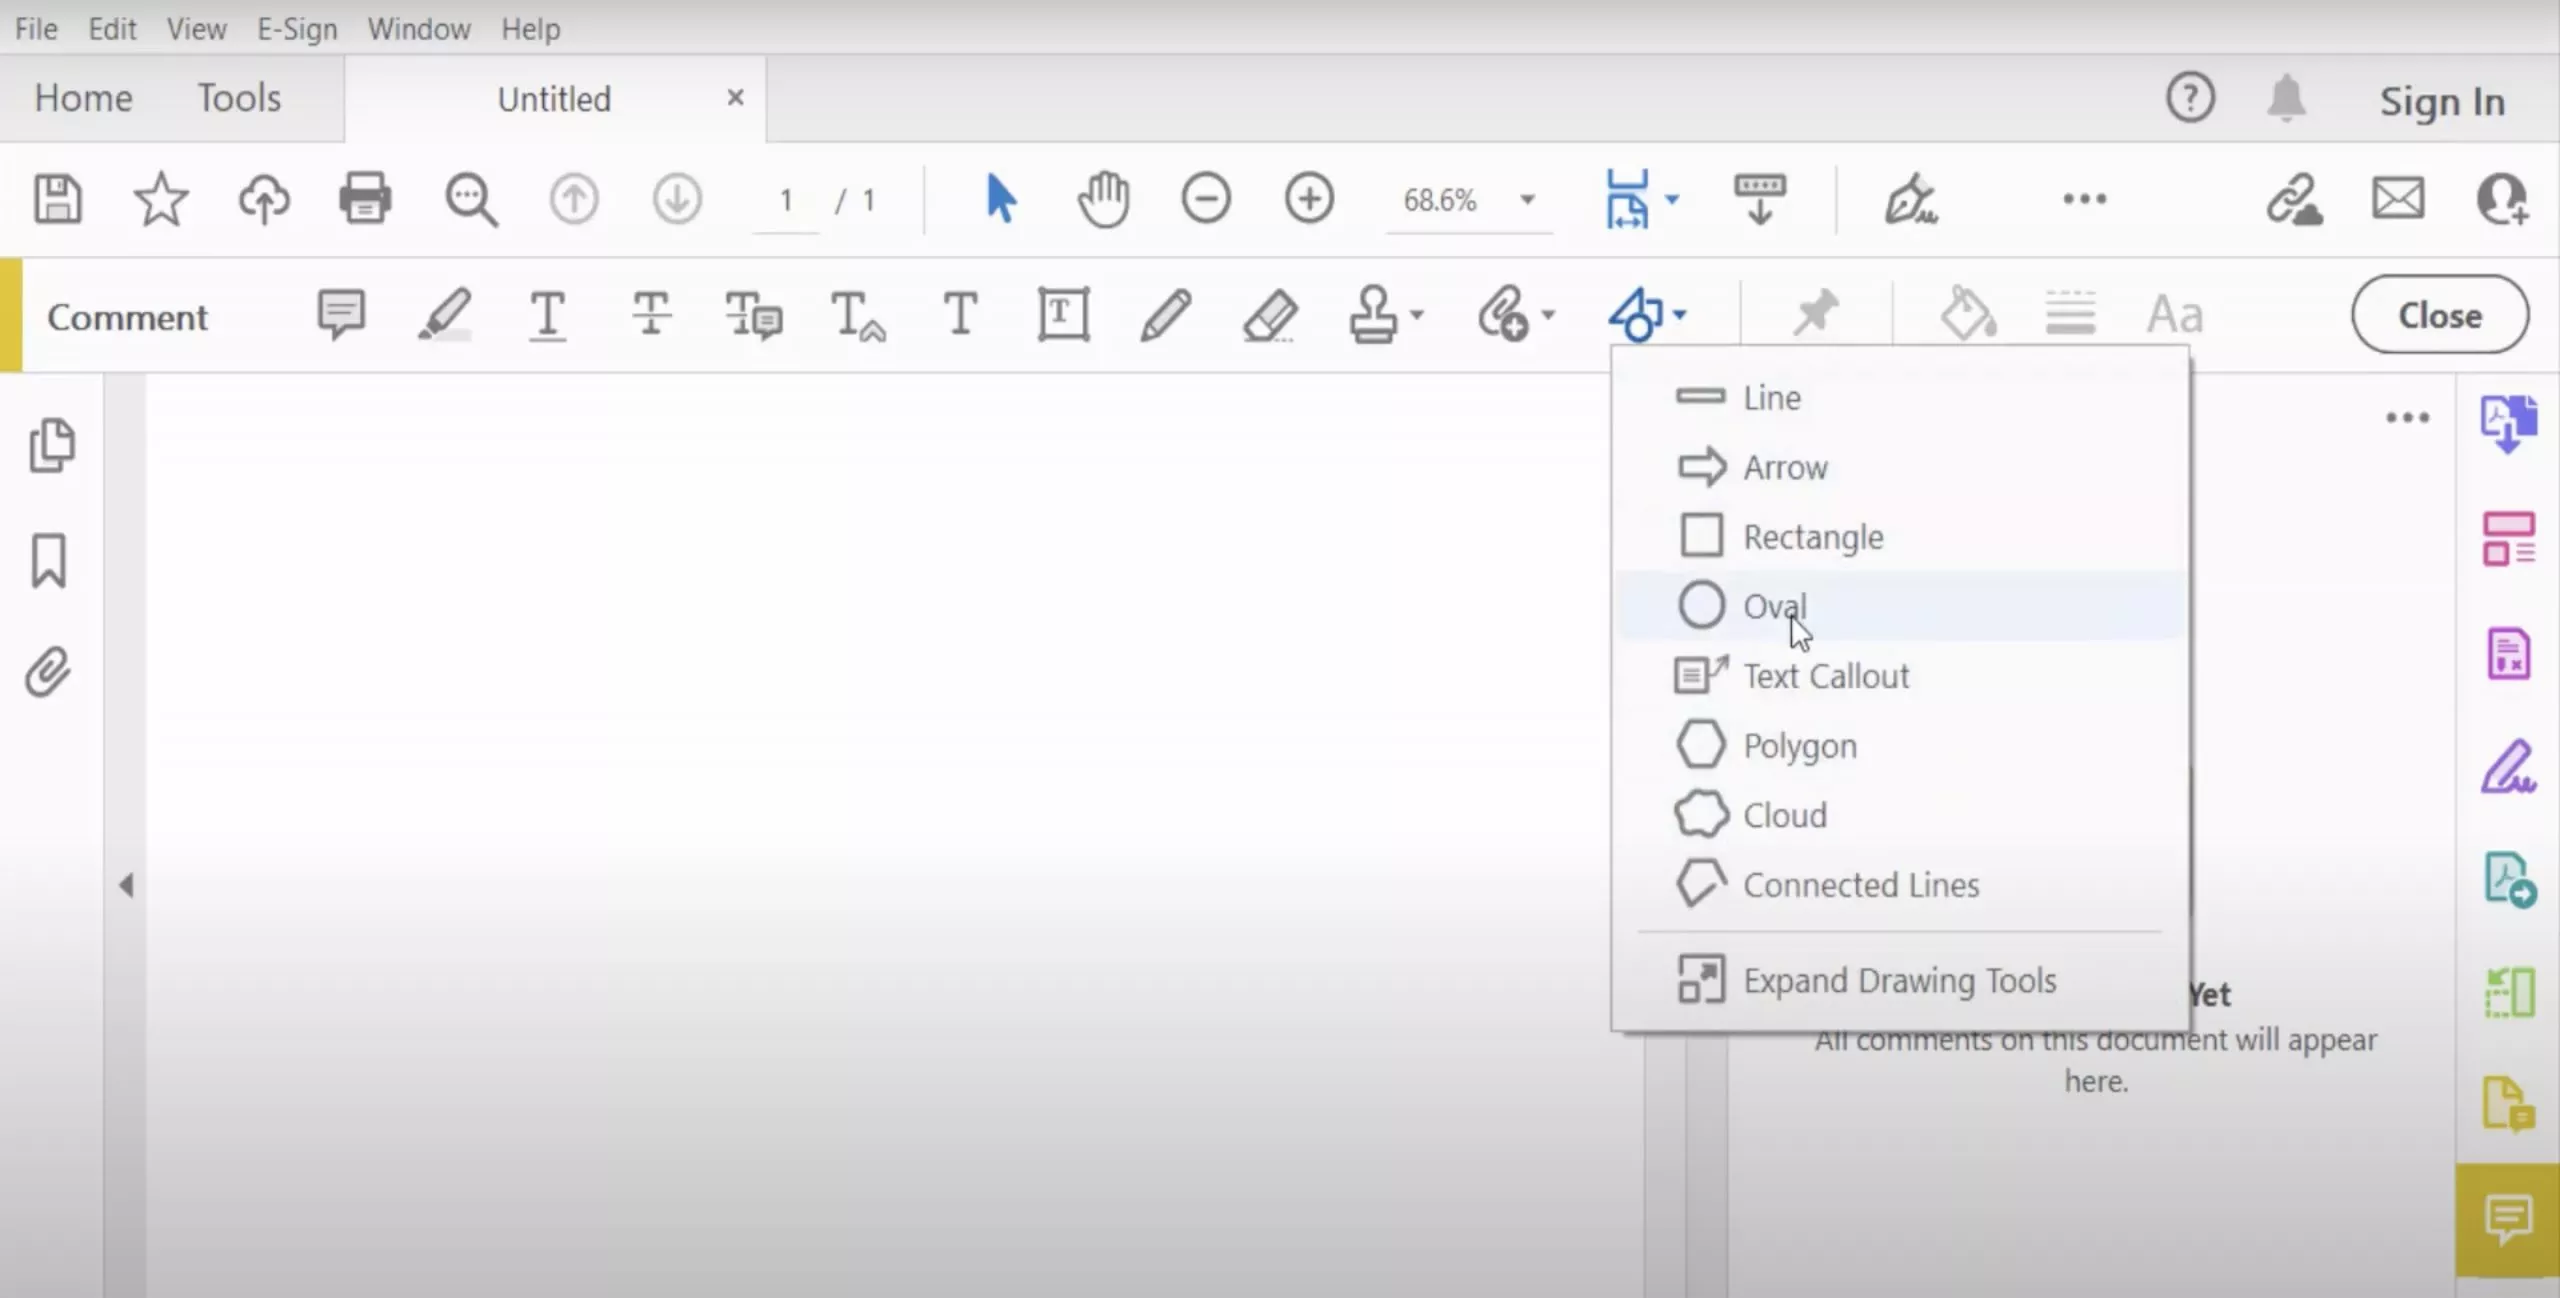 click shapes in the adobe acrobat to add